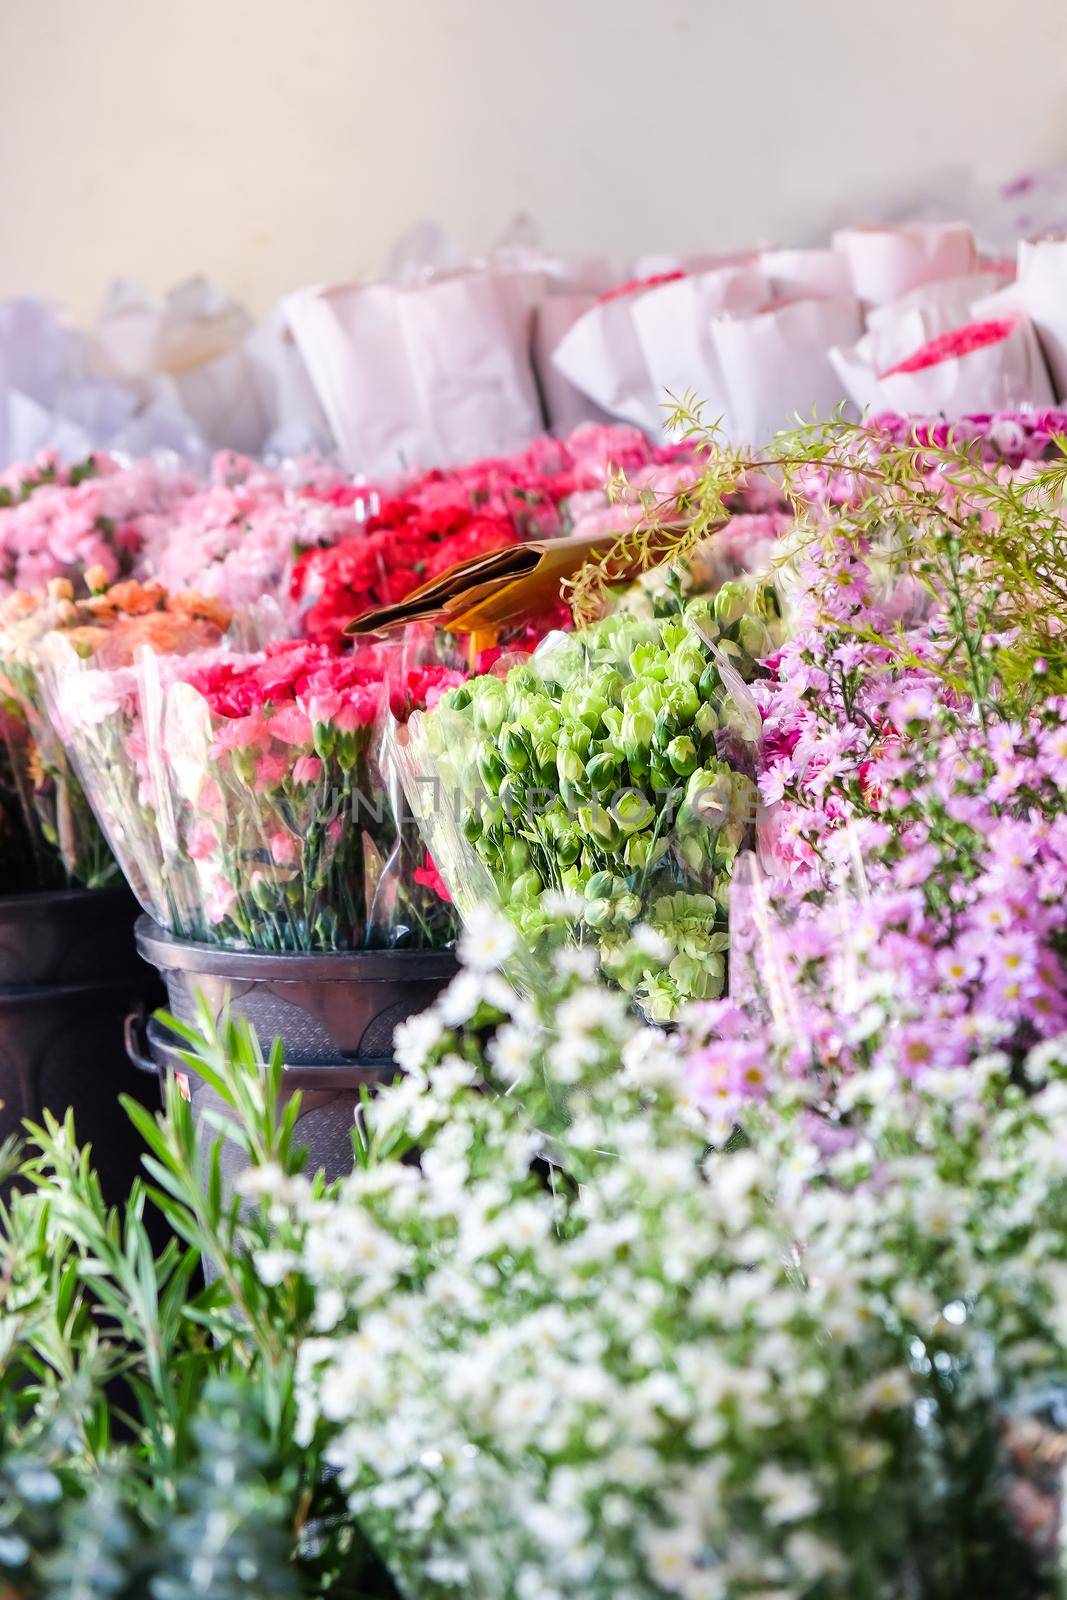 Bouquet of colorful flowers in market by ponsulak